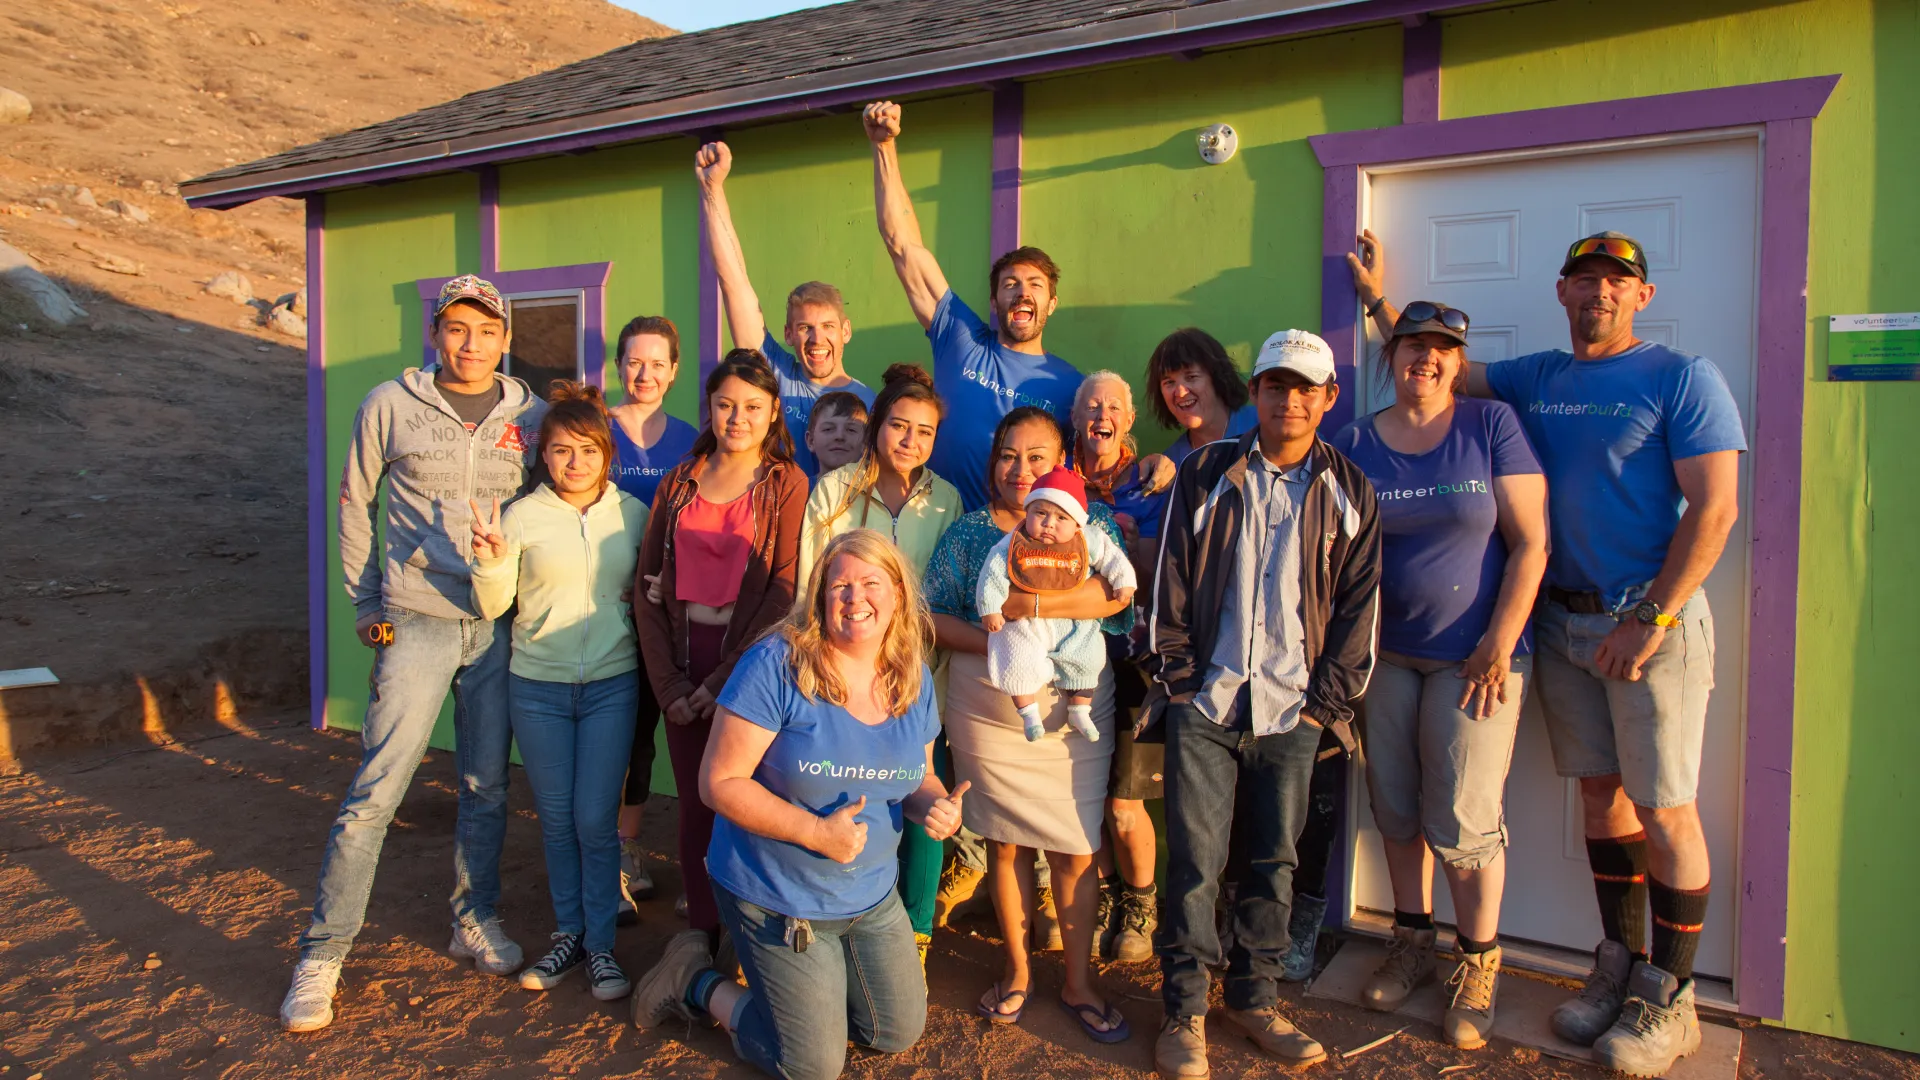 2018 and another Volunterbuild House in Mexico